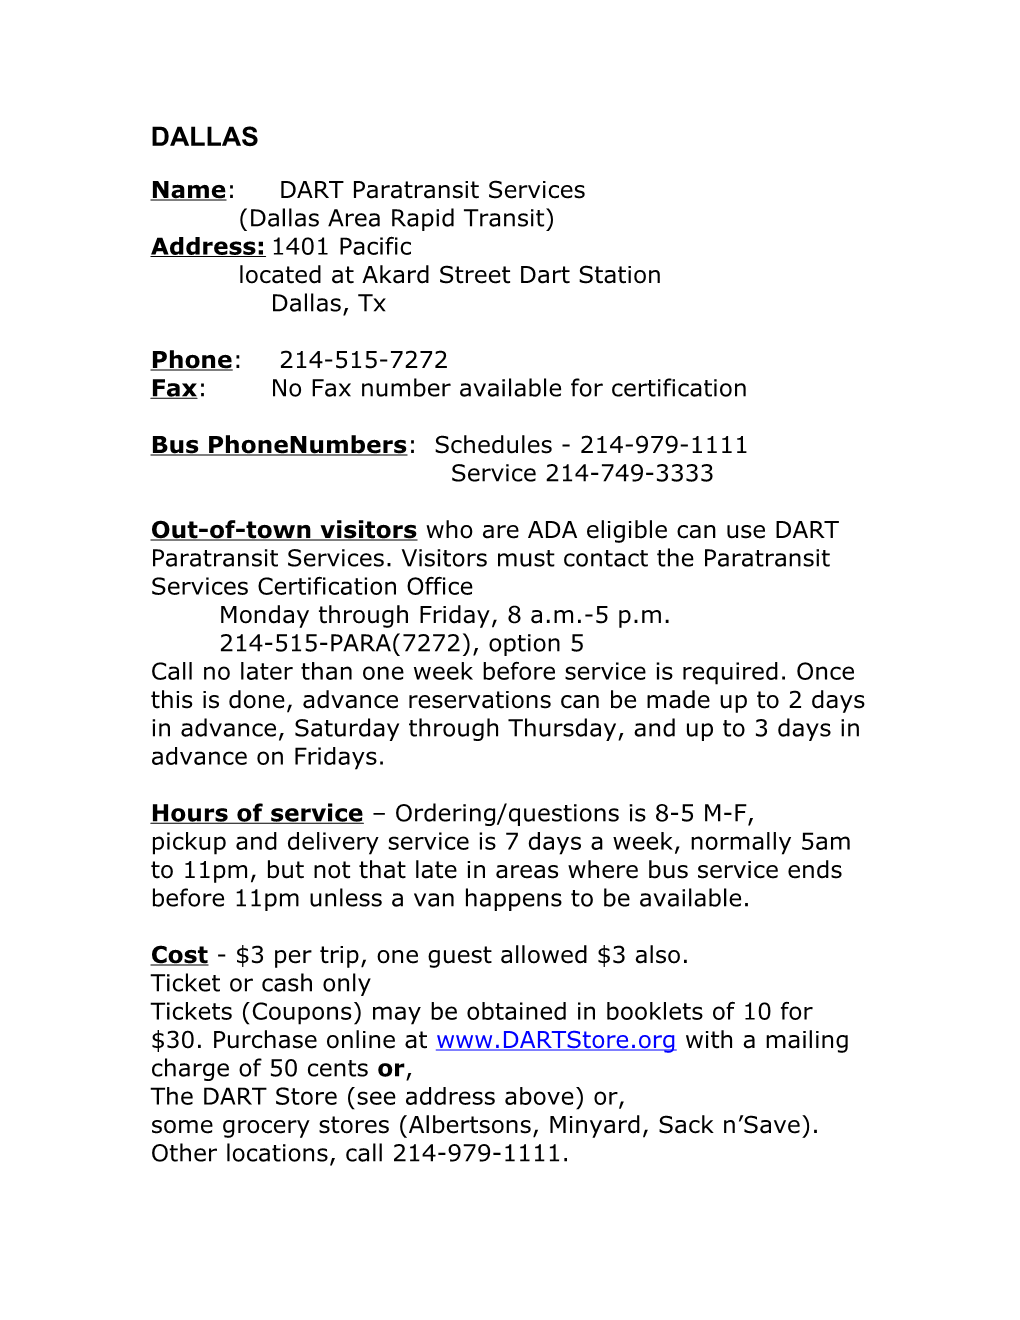 The Name of the Paratransit Service: DART Paratransit Service Dallas Area Rapid Transit